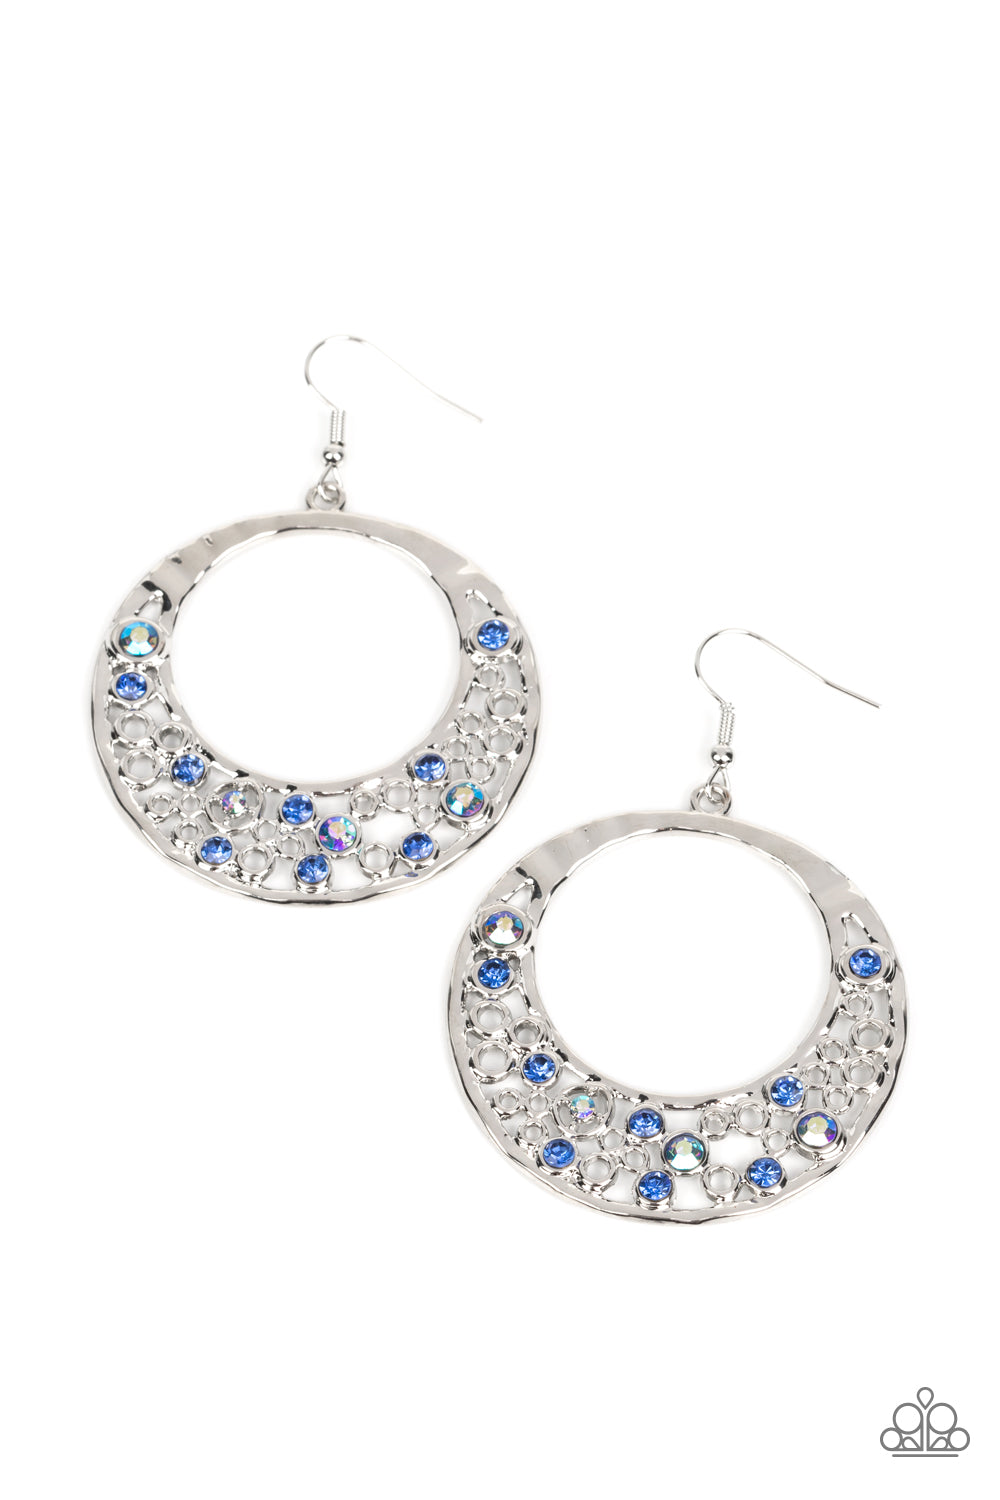 Enchanted Effervescence - Blue Iridescent and Silver Earrings - Paparazzi Accessories - A glittery collection of blue and iridescent rhinestones joins with dainty silver circles along the bottom of a hammered silver frame, bubbling into an extravagant effervescence.